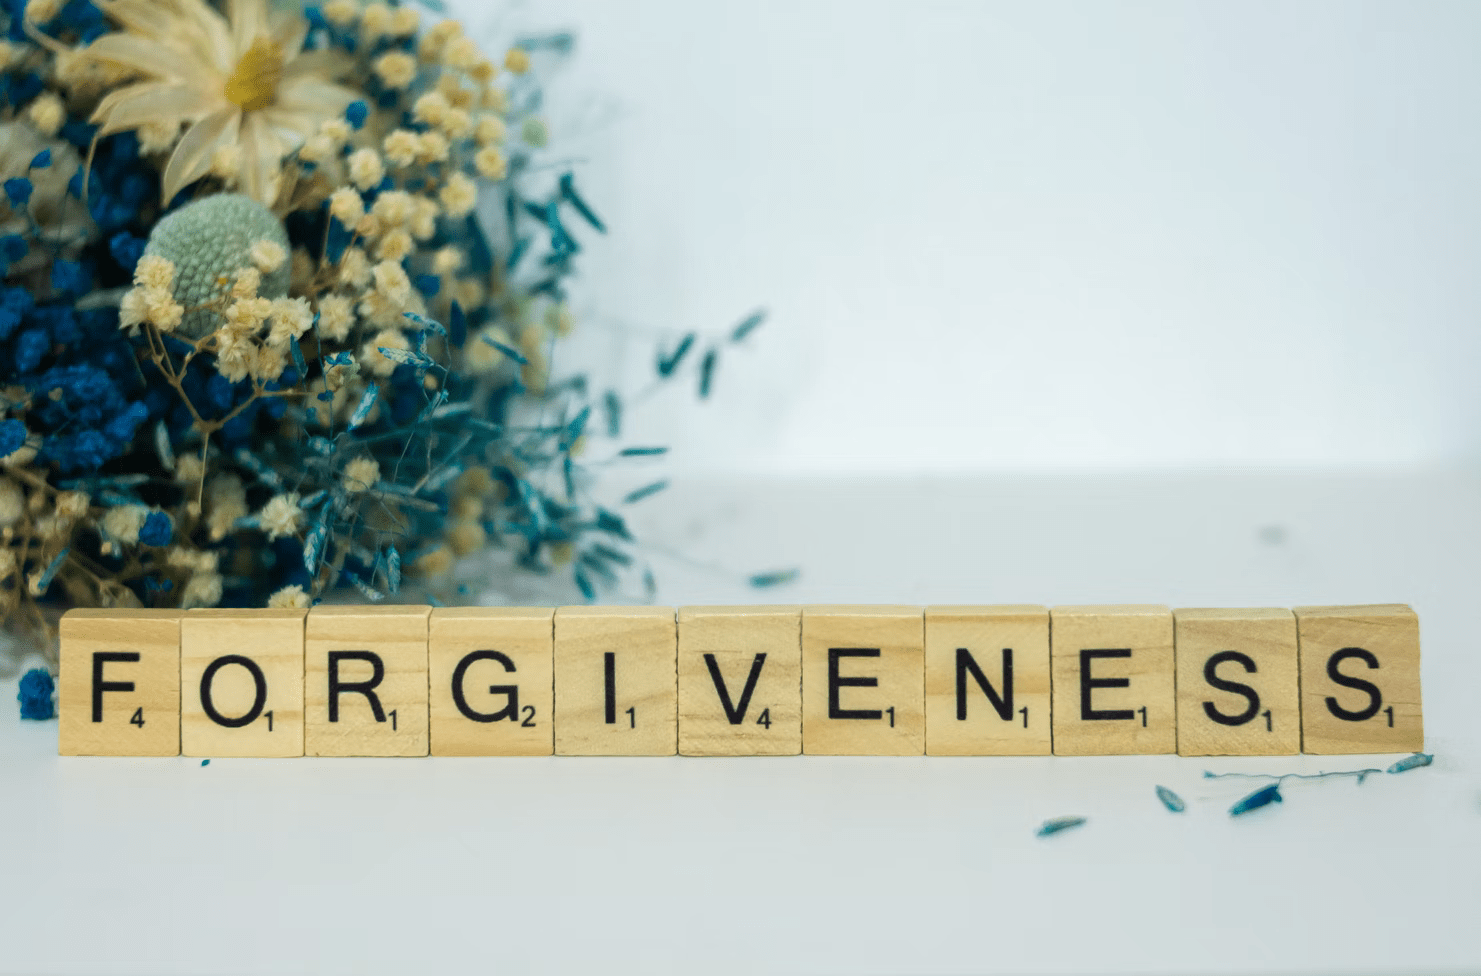 dice with letters folded into the word "forgiveness"